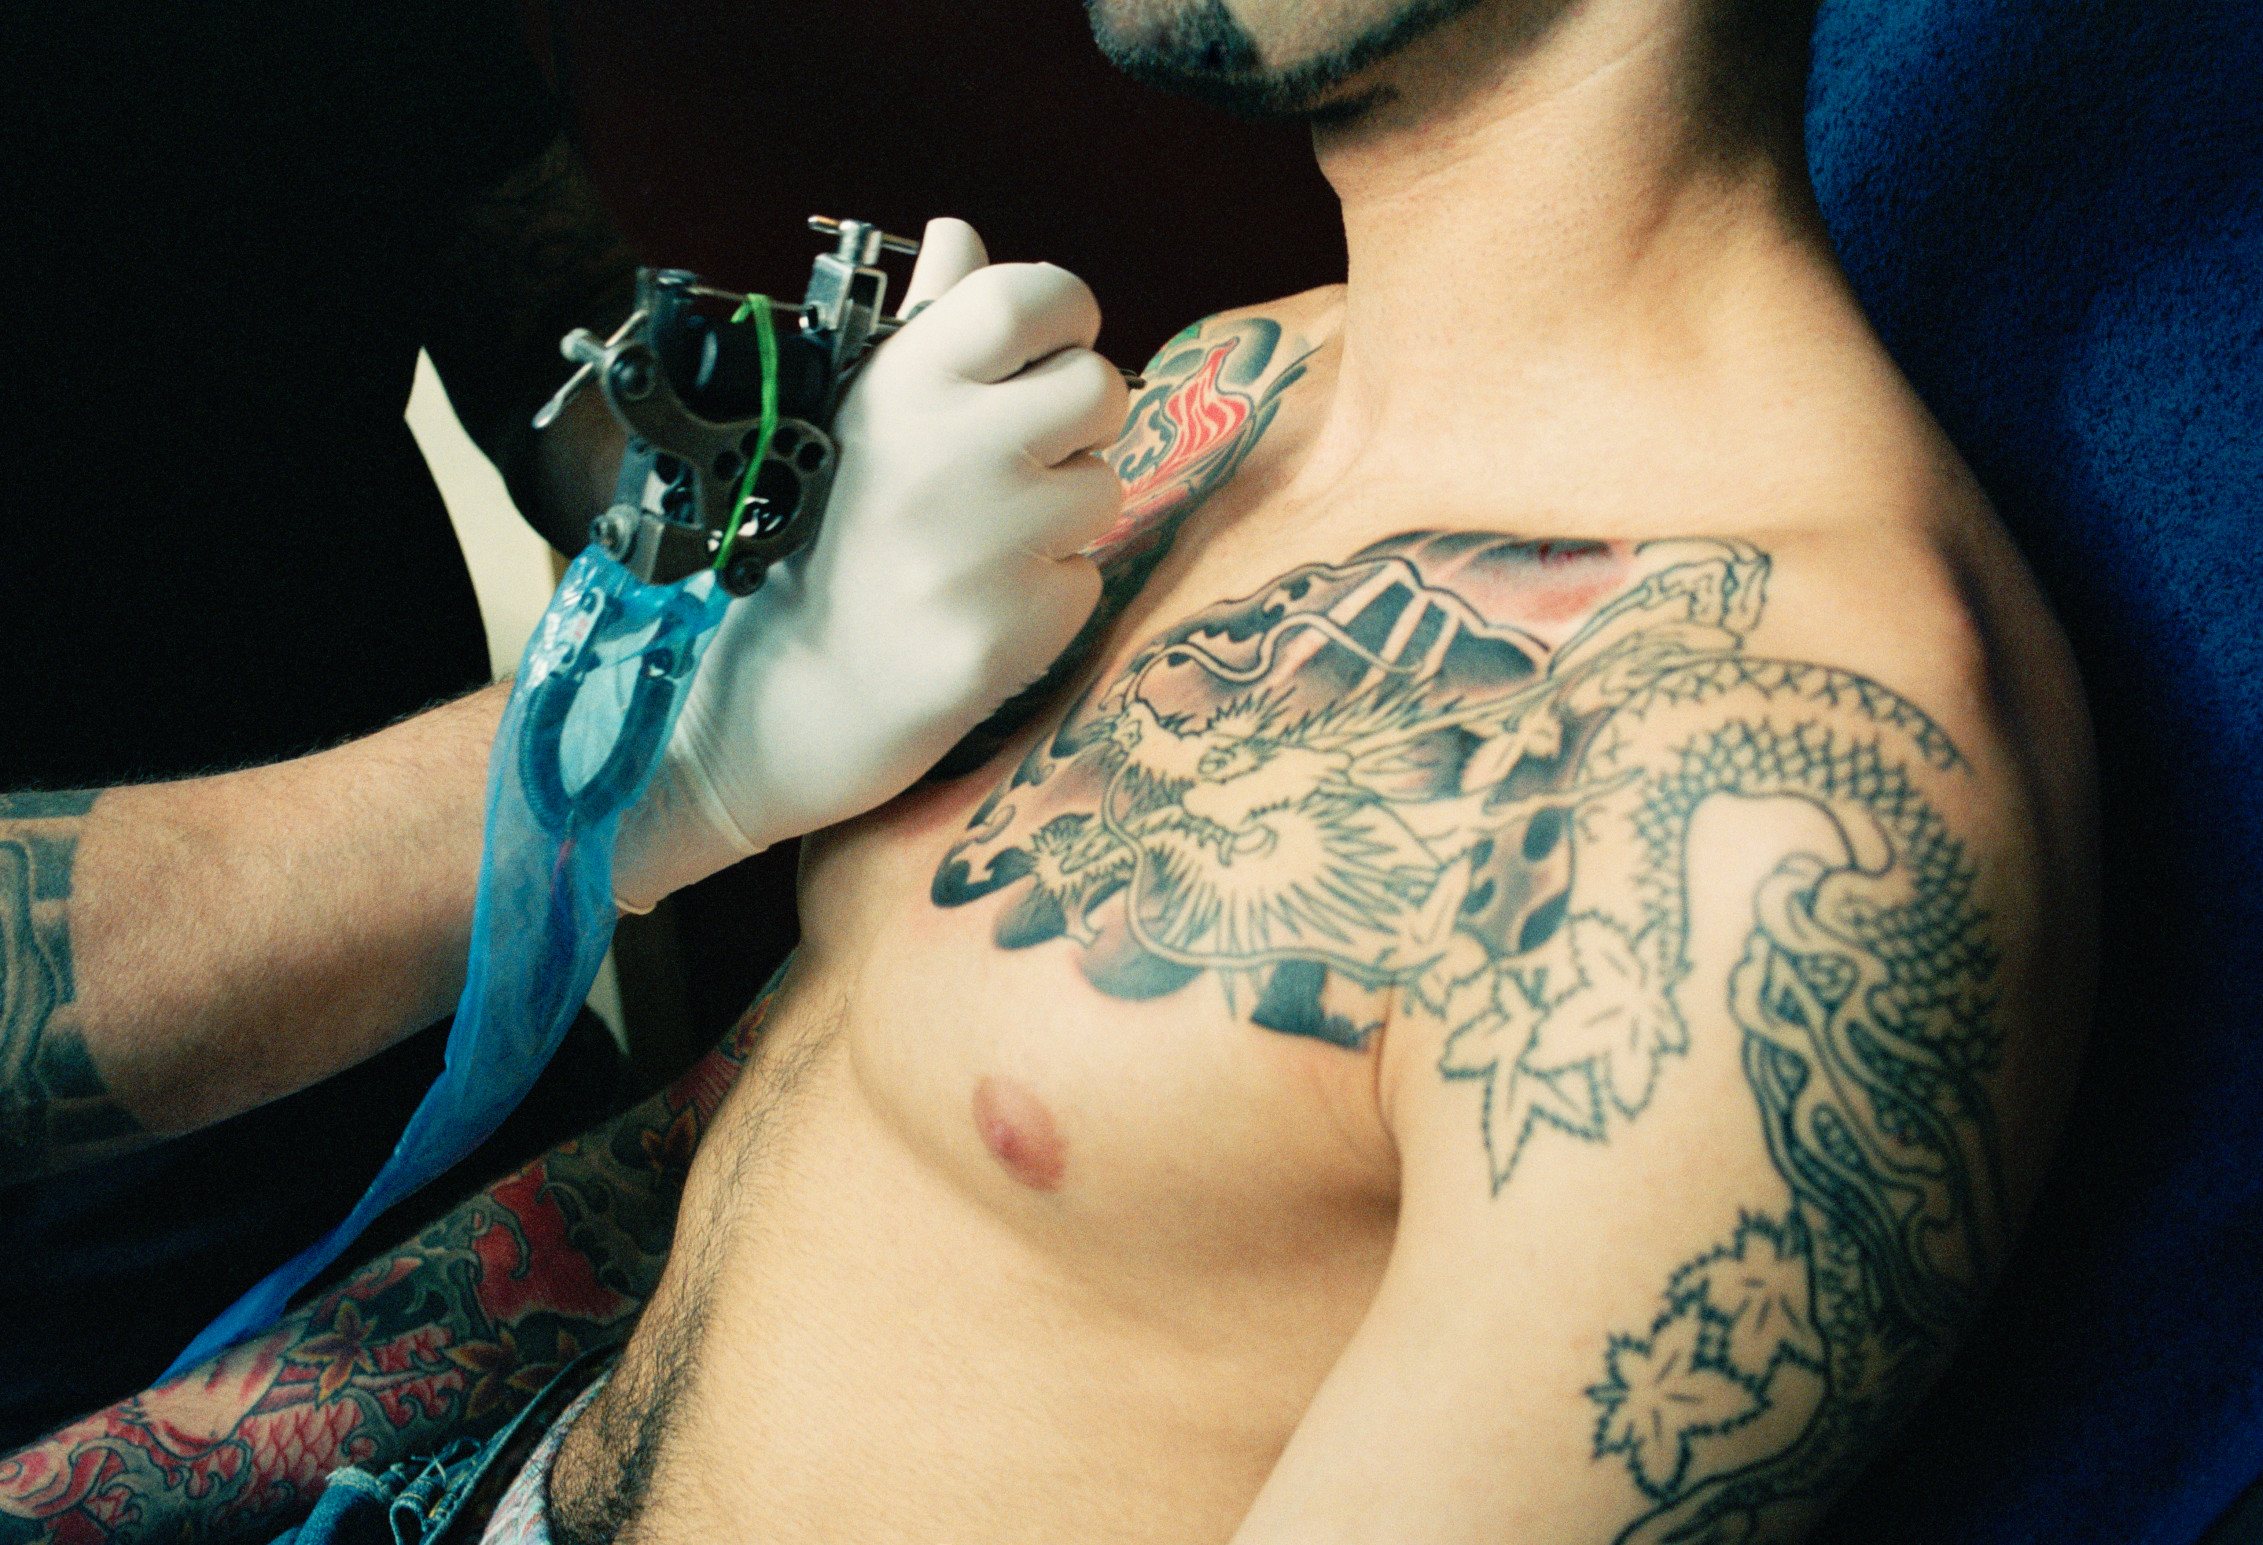 The Surprising Health Benefits of Getting Tattoos - What to Know